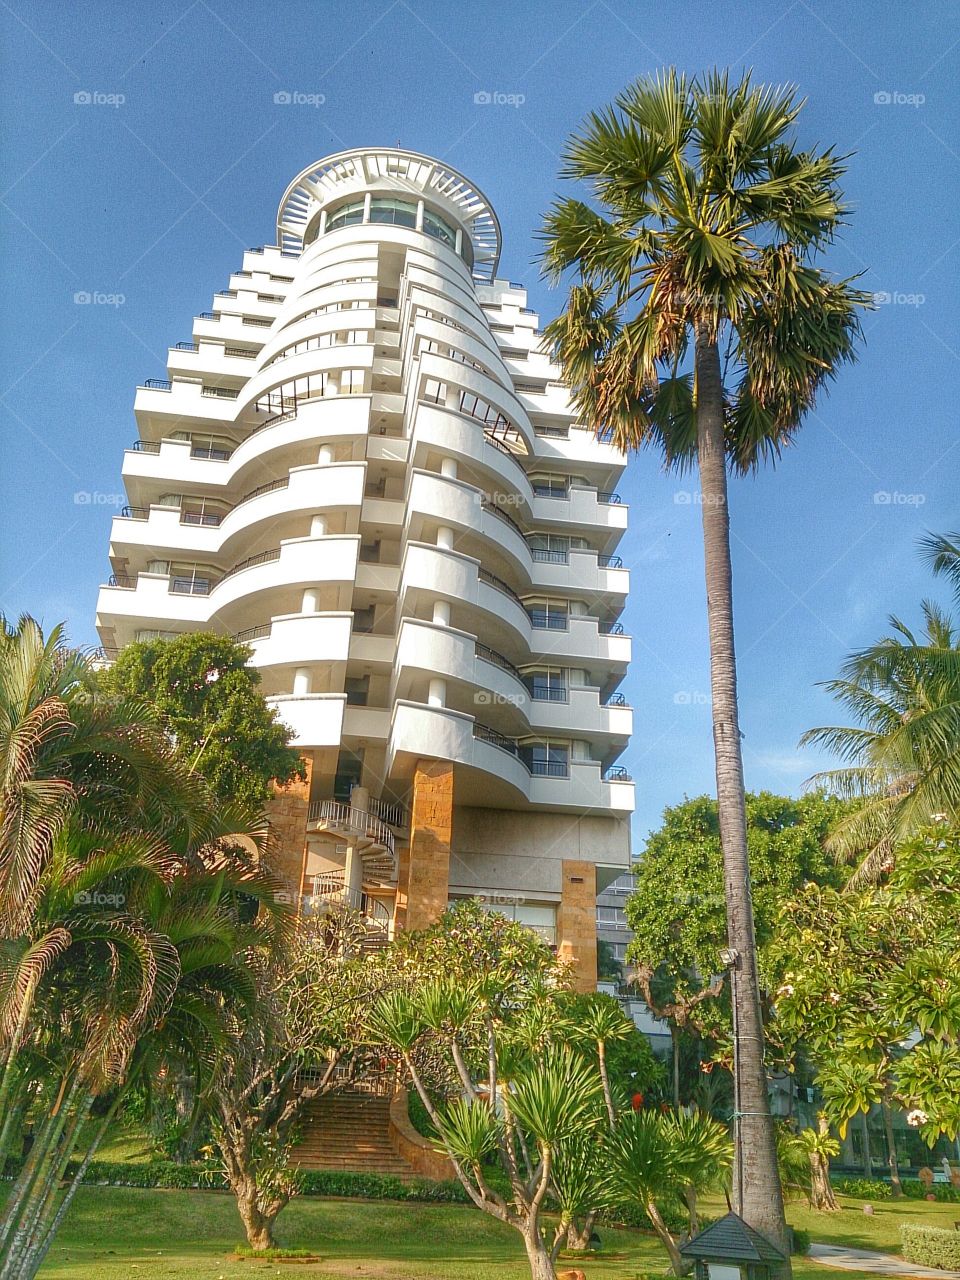 The Seaside Hotel. This extravagant hotel is along the sea.